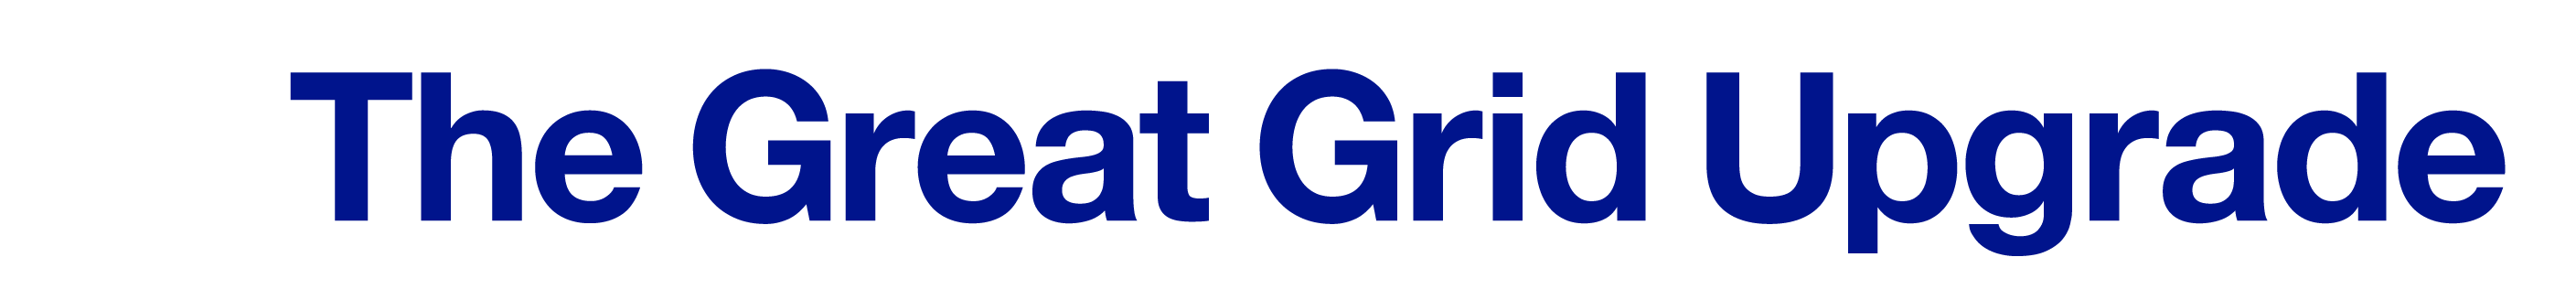 An image of the Great Grid Upgrade branding